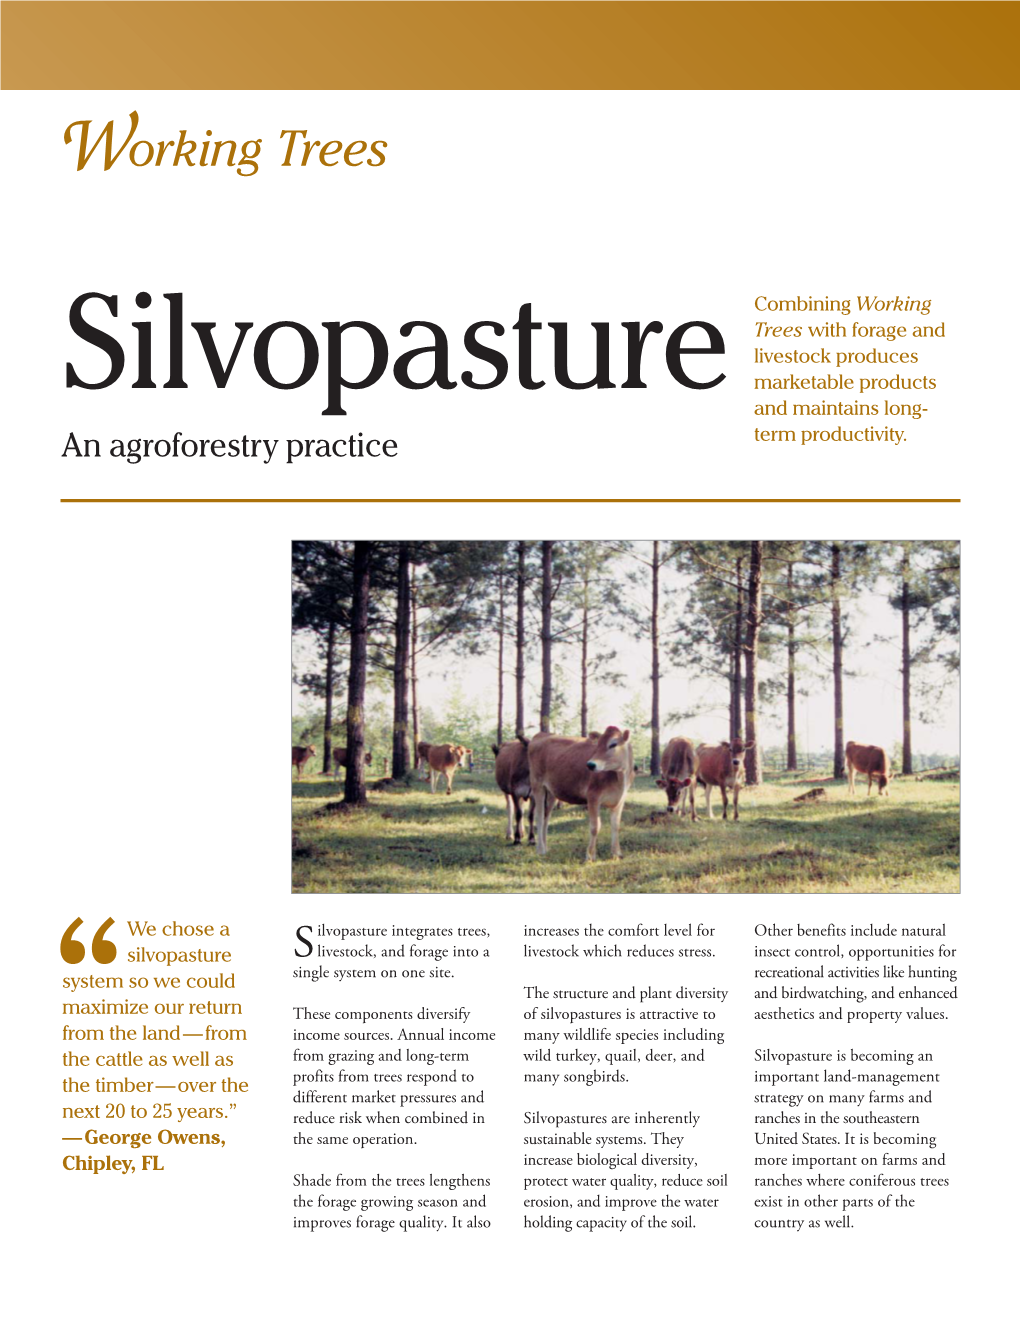 Working Trees for Silvopasture